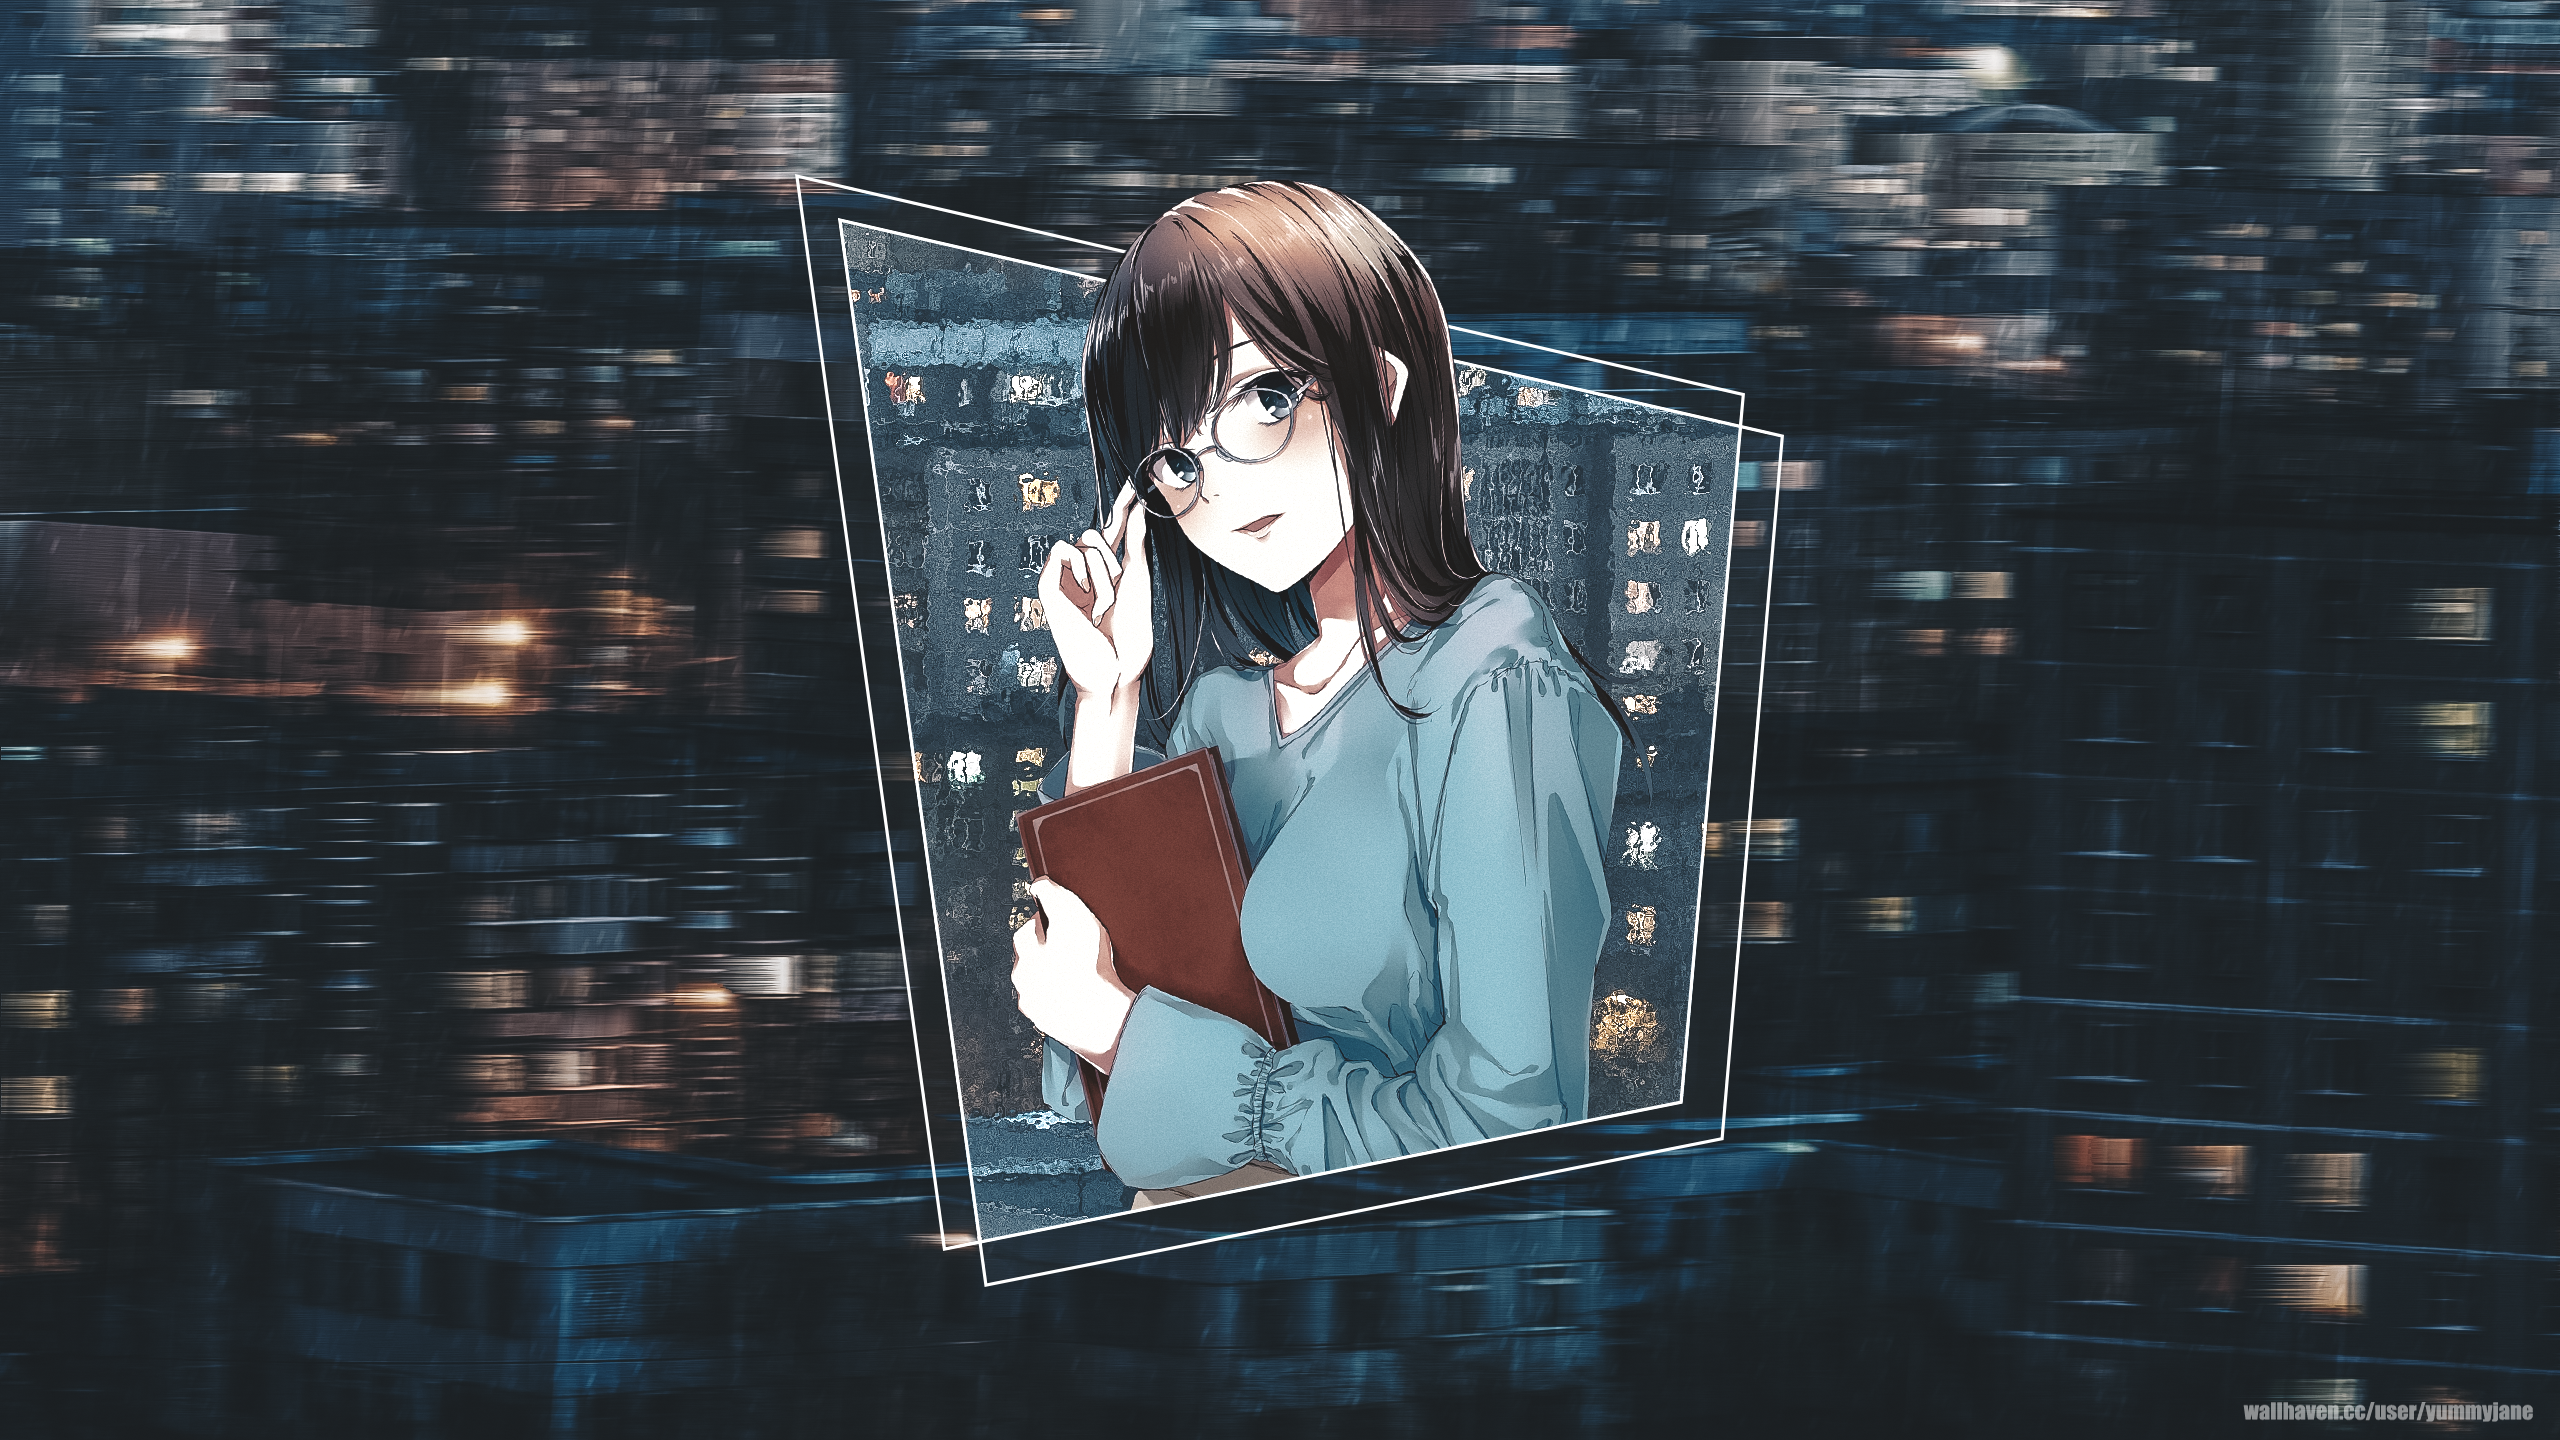 Anime 2560x1440 anime anime girls glasses rain city picture-in-picture books